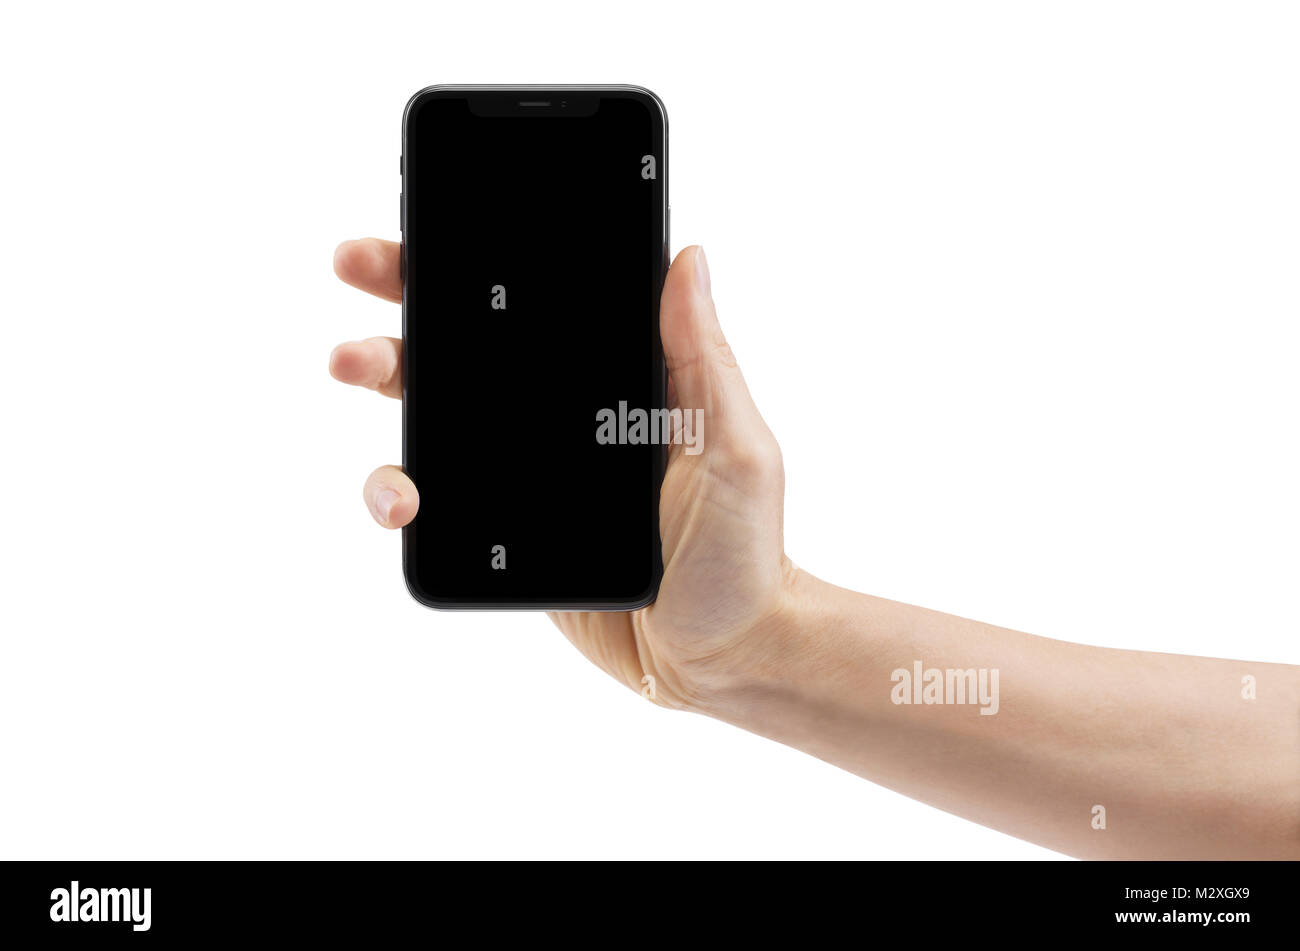 Woman hand holding Apple iPhone X, large screen smartphone, with blank black screen. The phone is isolated on white background with a clipping path. Stock Photo